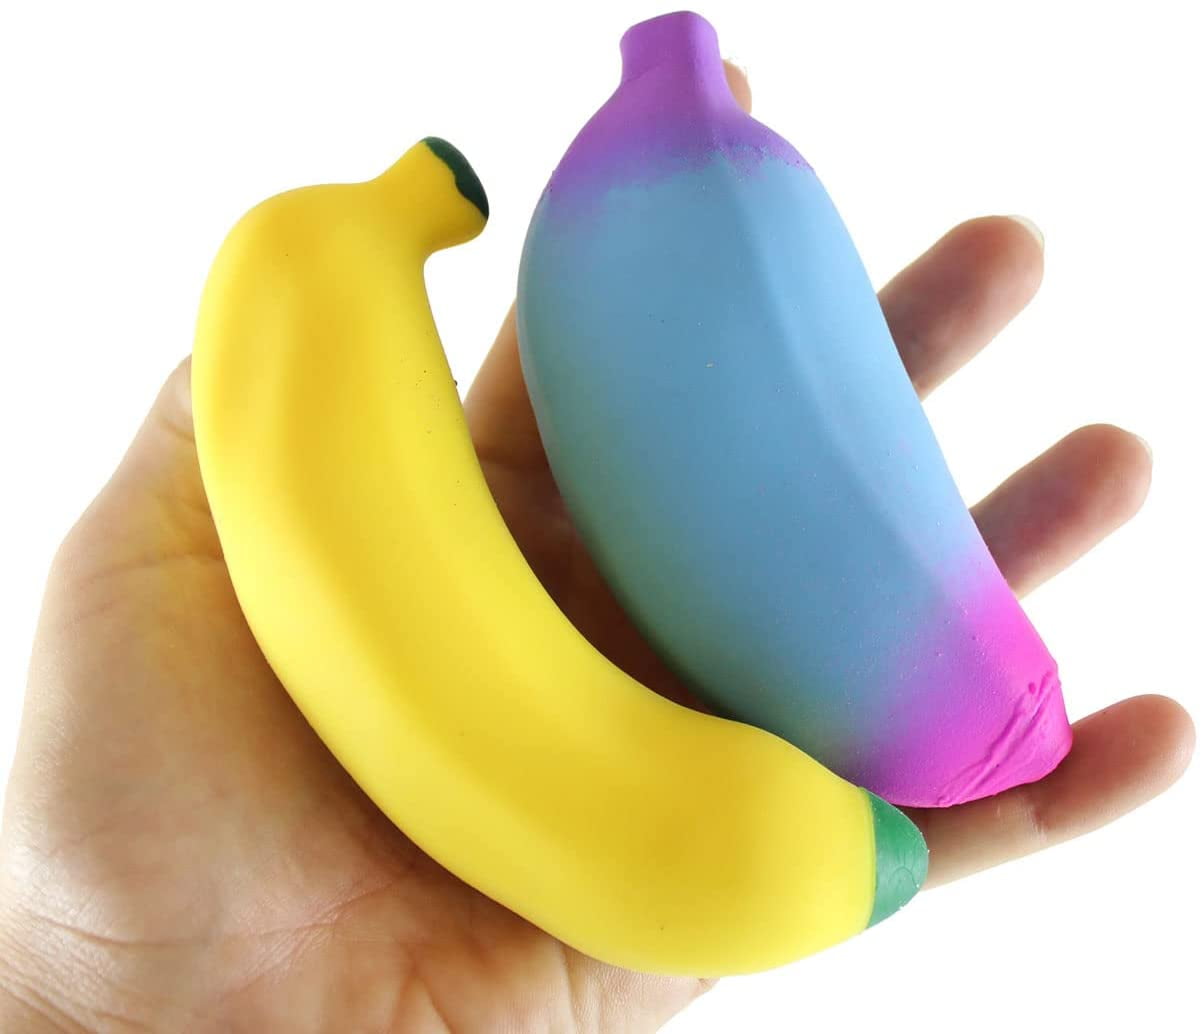 Playkidiz Banana Squish Ball, Air Filled Stretchy Banana Fidget Pack  Sensory Toy, Anxiety Relief and Autism Toys for Adults and Kids, Pack of 4,  Ages 3+ - Toys 4 U